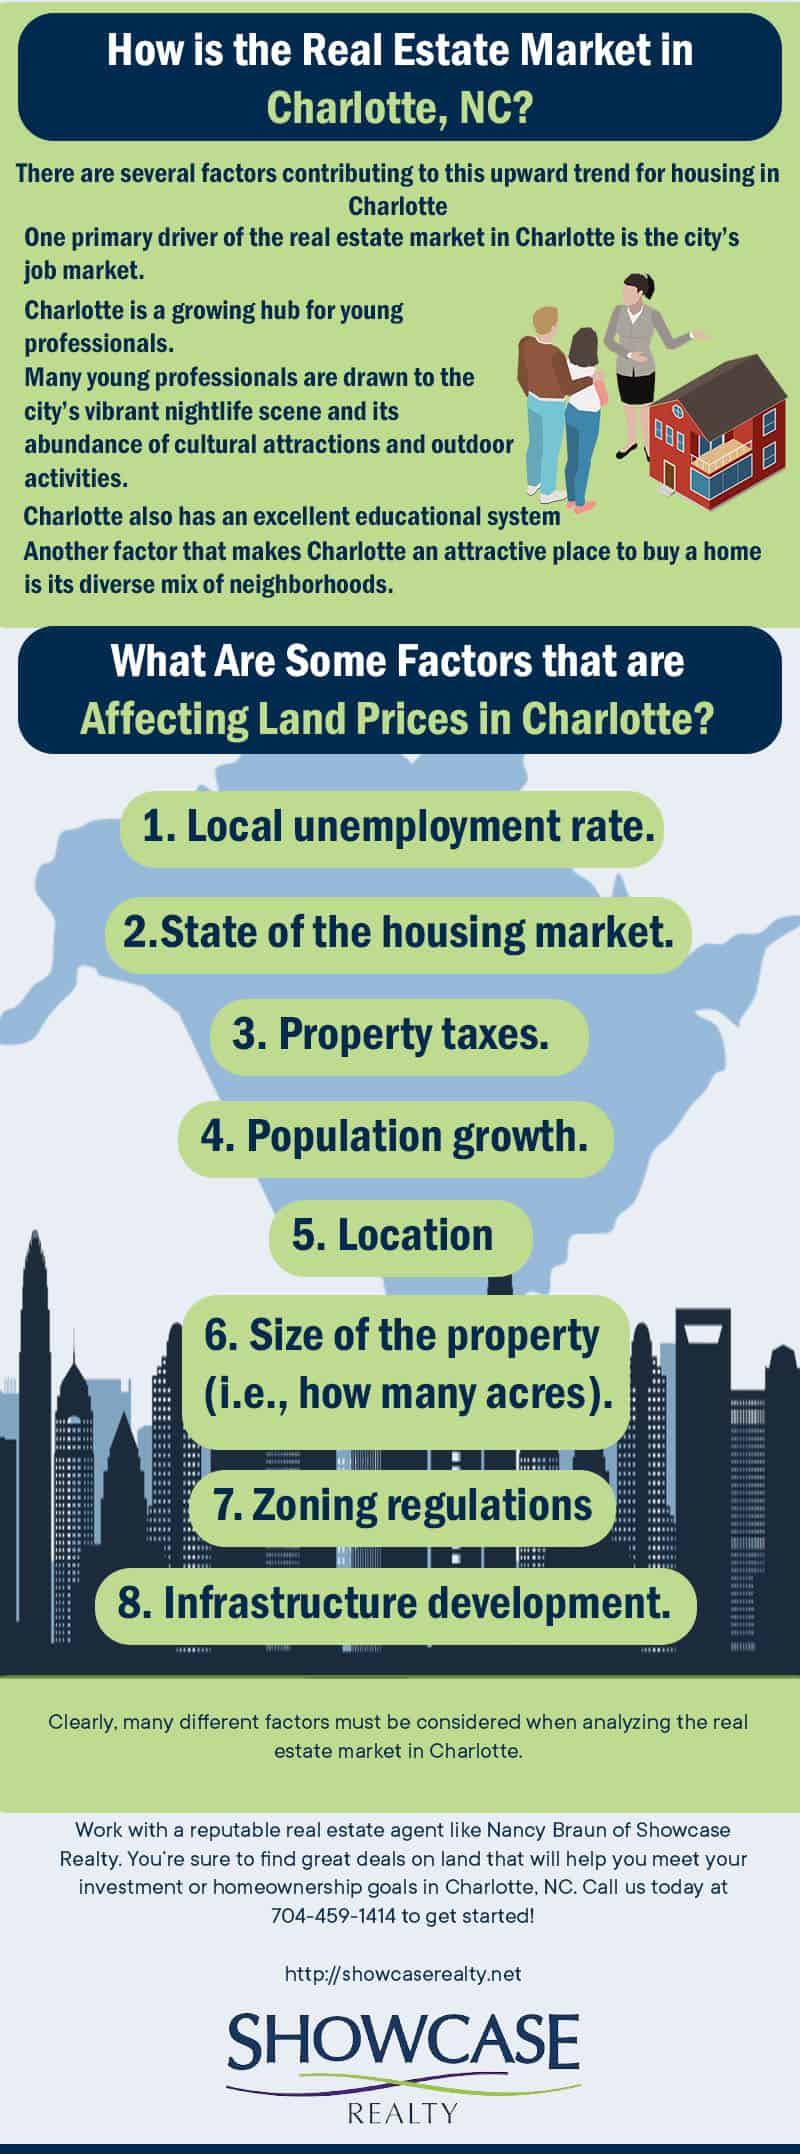 Charlotte North Carolina Homes for Sale - Call Nancy Braun of Showcase Realty today to assist you with finding great deals on land.